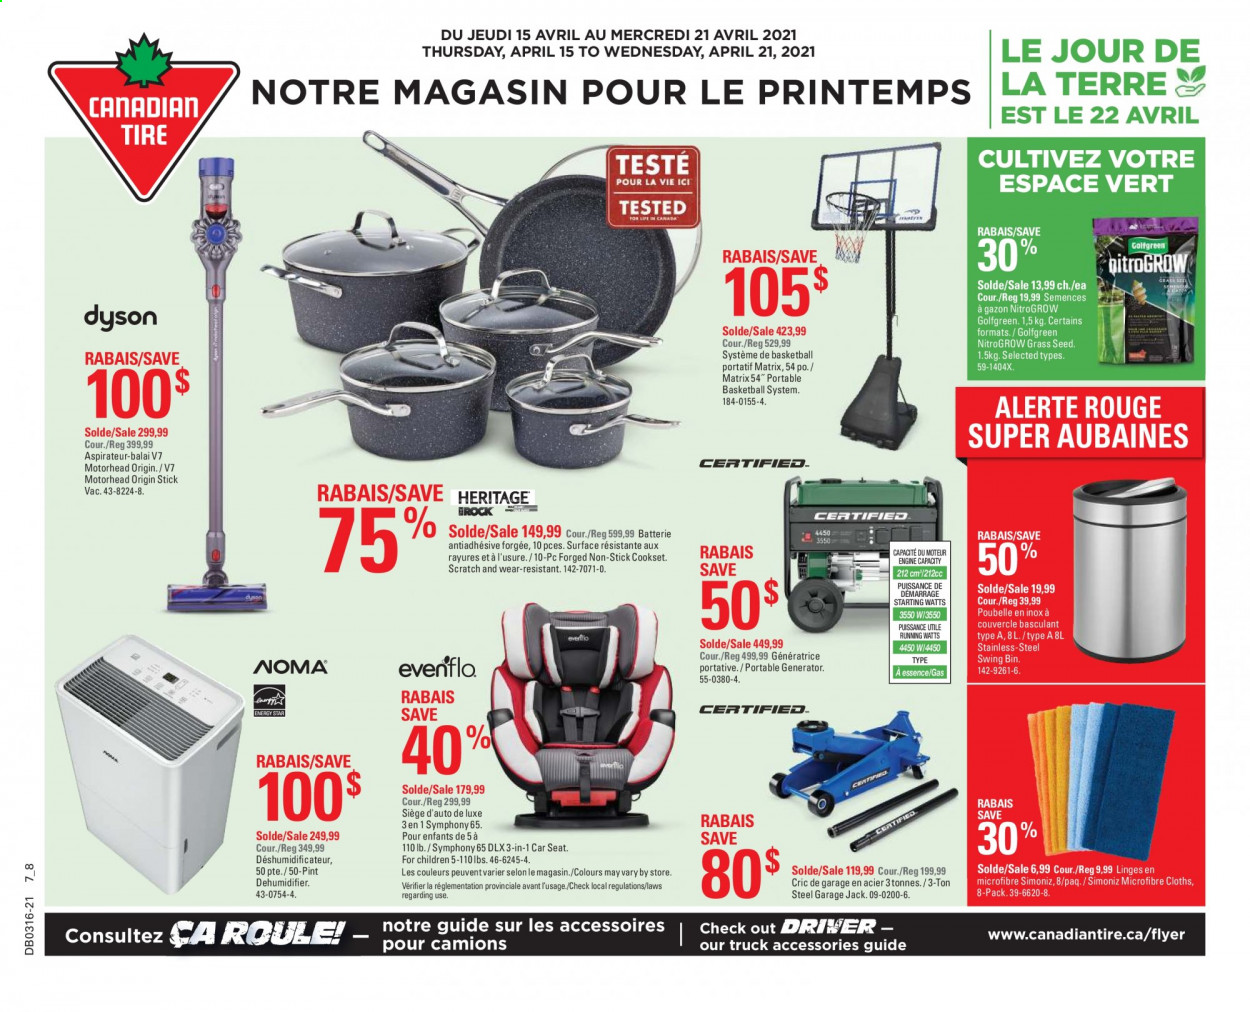 thumbnail - Canadian Tire Flyer - April 16, 2021 - April 22, 2021 - Sales products - bin, plant seeds, portable basketball system, basketball, baby car seat, generator, grass seed. Page 1.